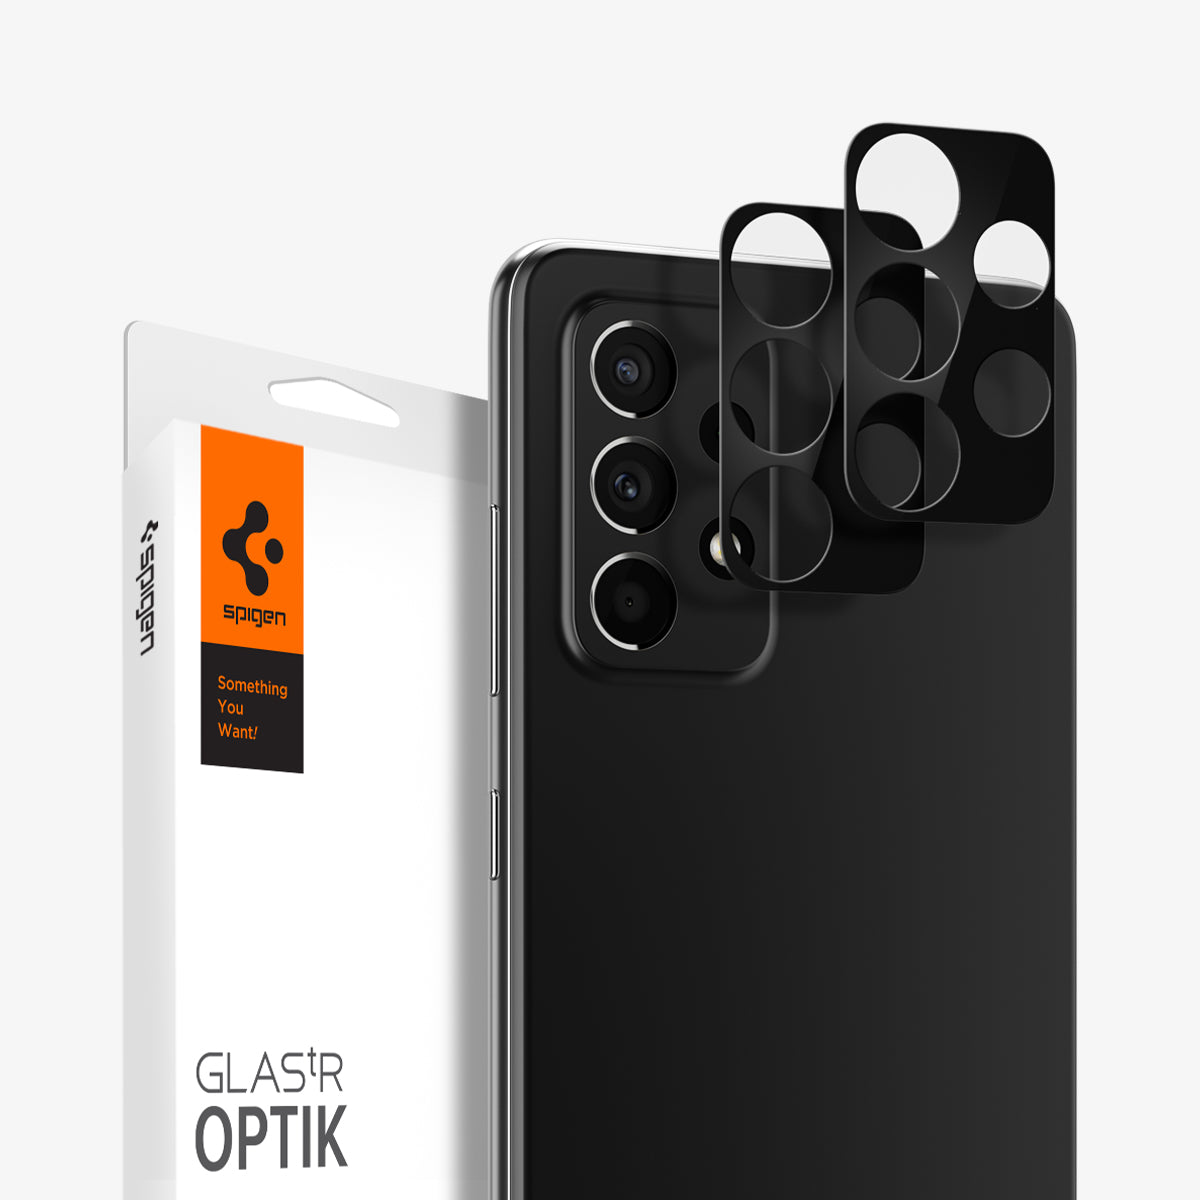 AGL02836 - Galaxy A52 Optik Lens Protector in Black showing the 2 lens tray hovering in front of a device, behind it, is a packaging